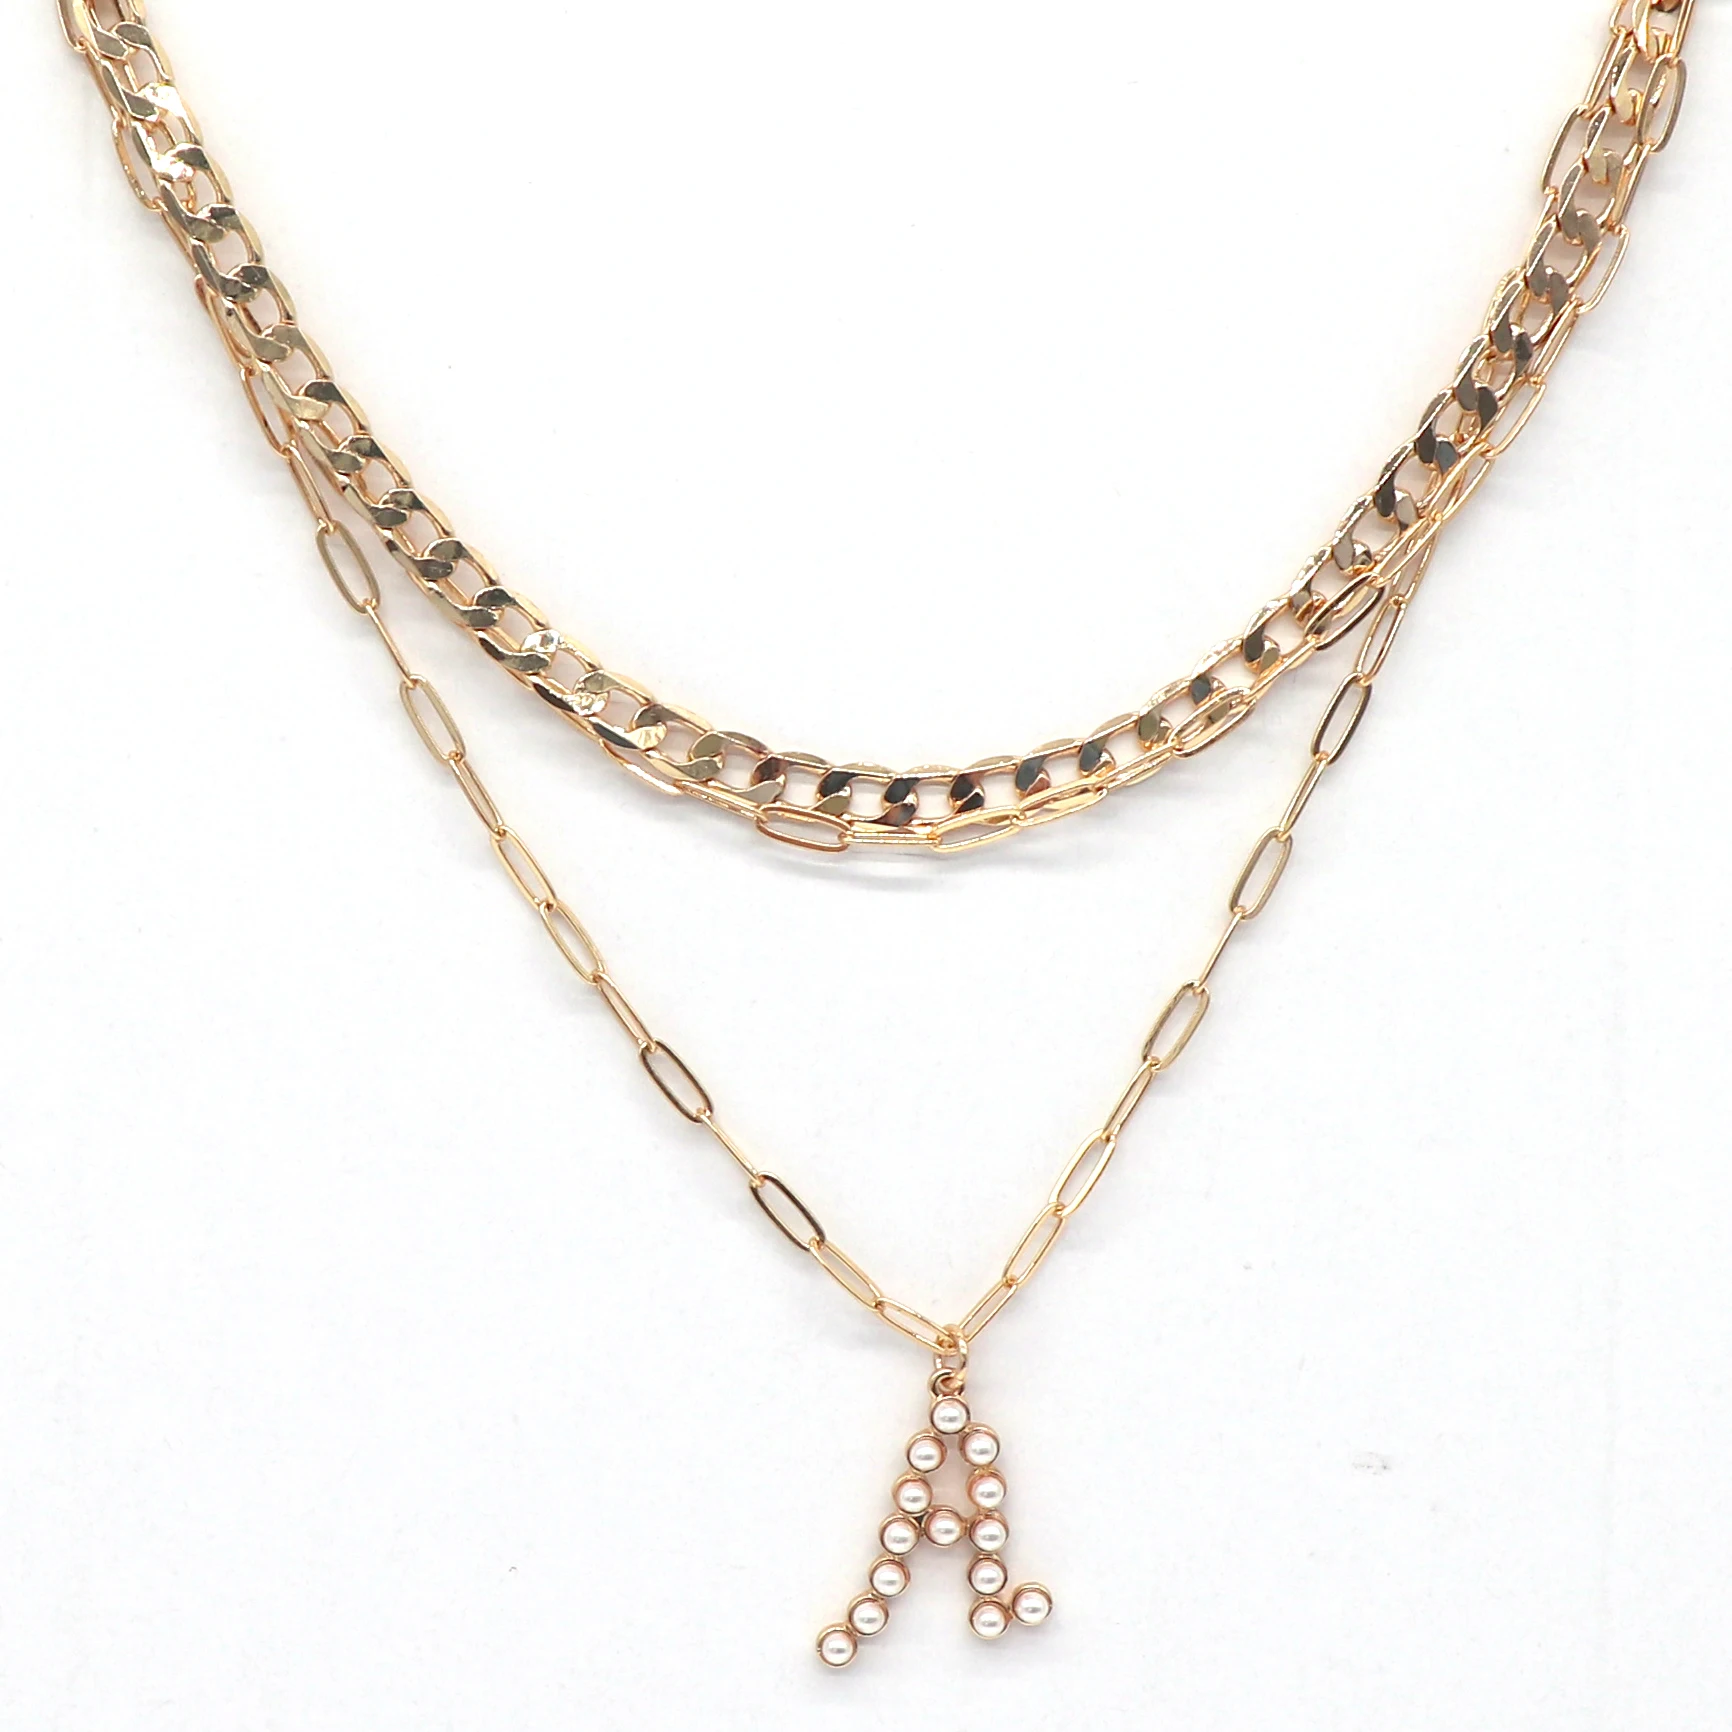 Fashion triple layers flat curb chain and link chains with letter pendant necklace For Women Jewelry Casual style